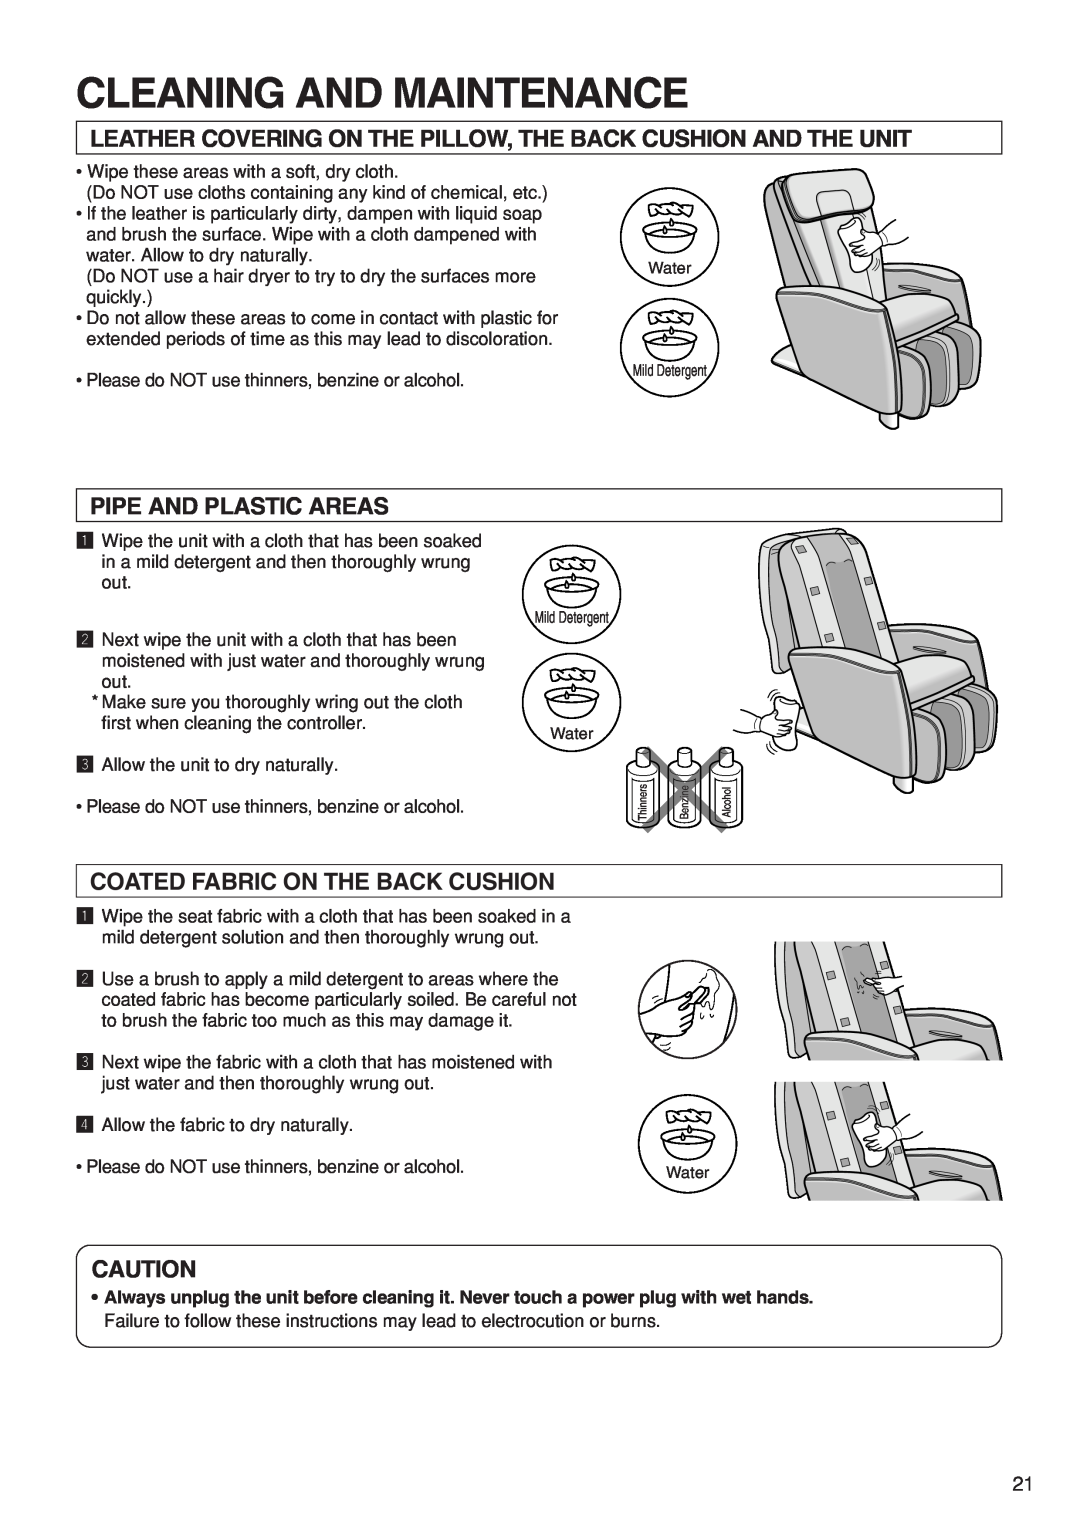 Panasonic EP1273 operating instructions Cleaning And Maintenance, Pipe And Plastic Areas, Coated Fabric On The Back Cushion 